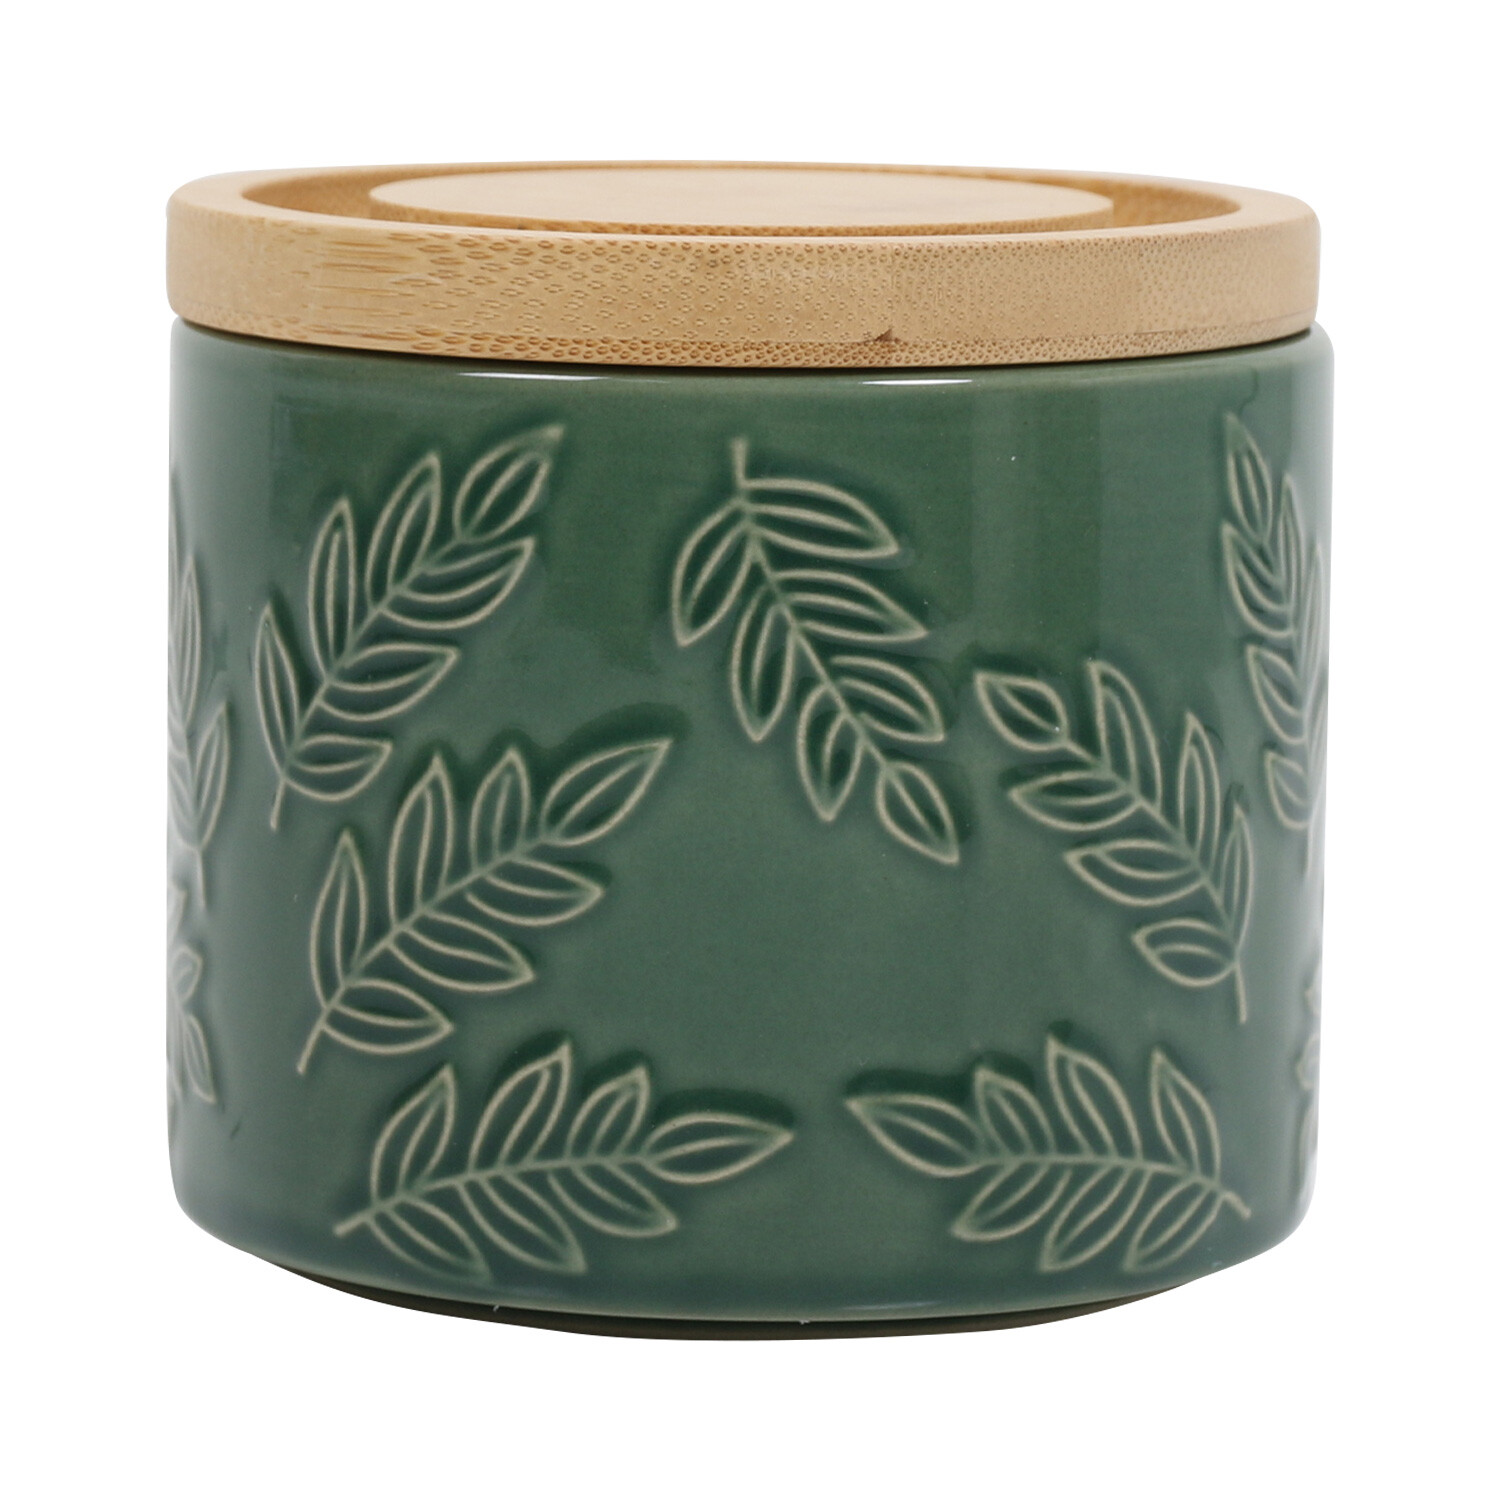 Small Green Botanical Stacking Ceramic Canister Image 1